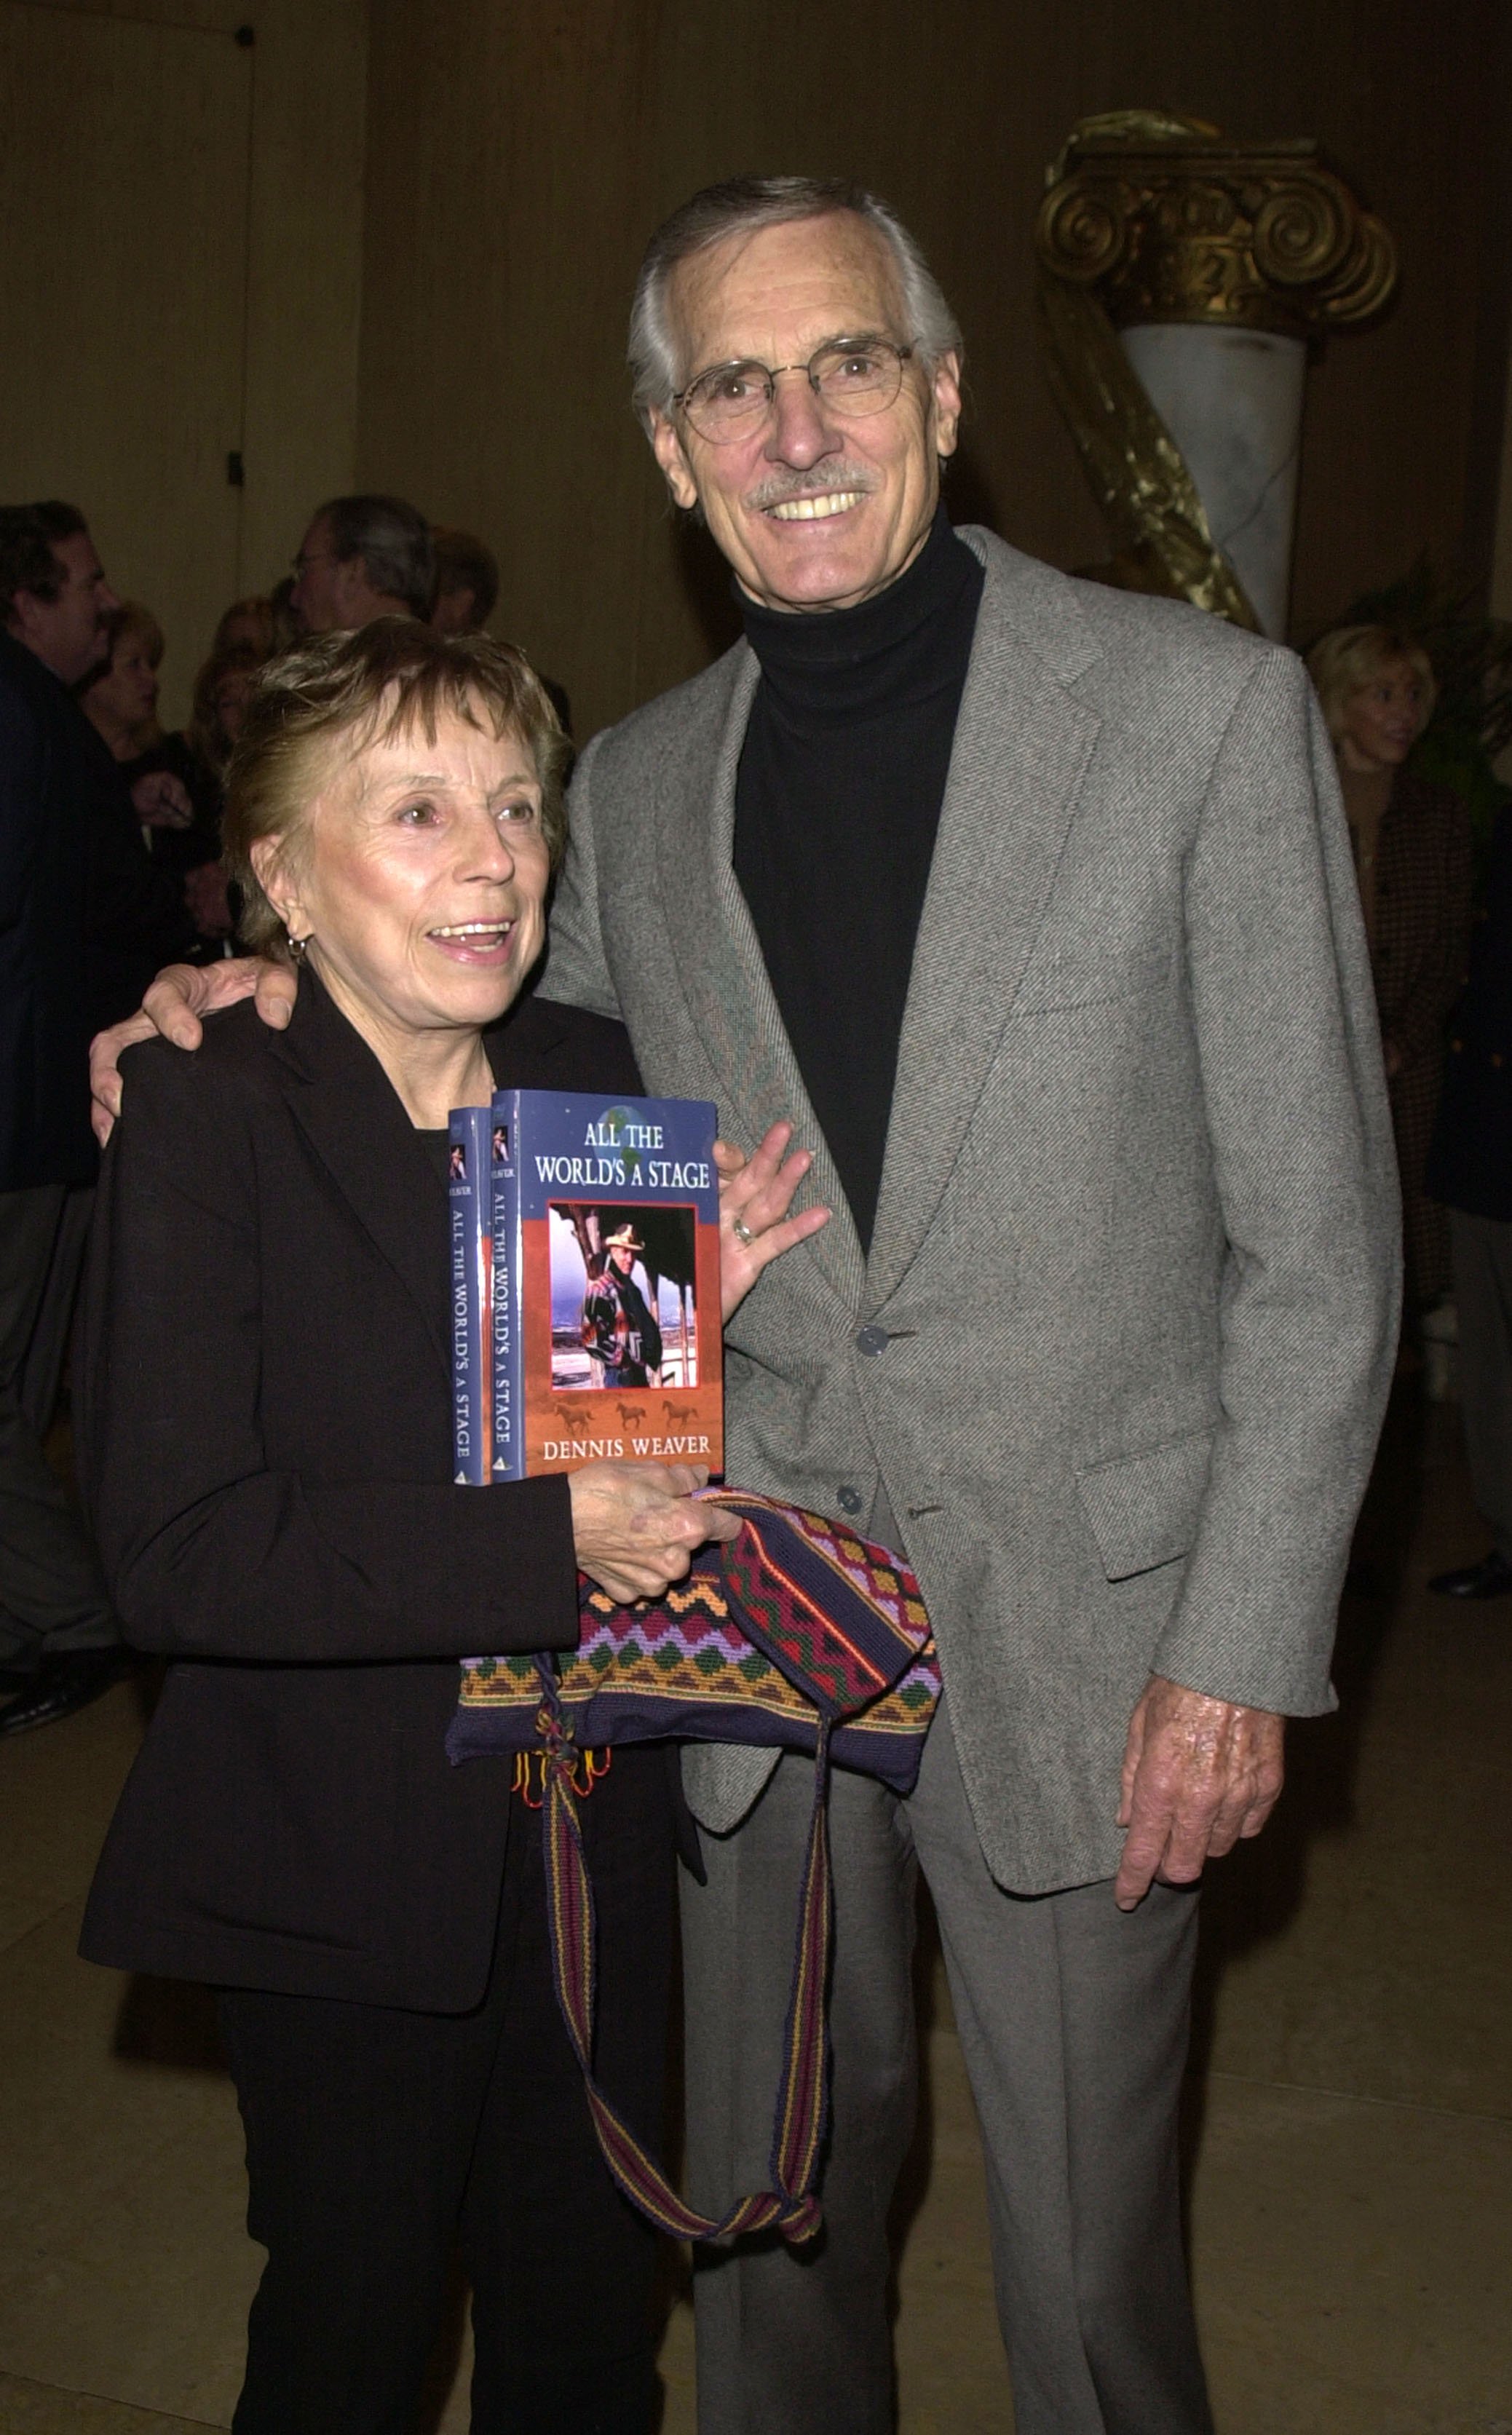 Dennis Weaver and Gerry Stowell presenting his new book during Golden Apple Awards Luncheon at Beverly Hilton Hotel in Beverly Hills, California. / Source: Getty Images